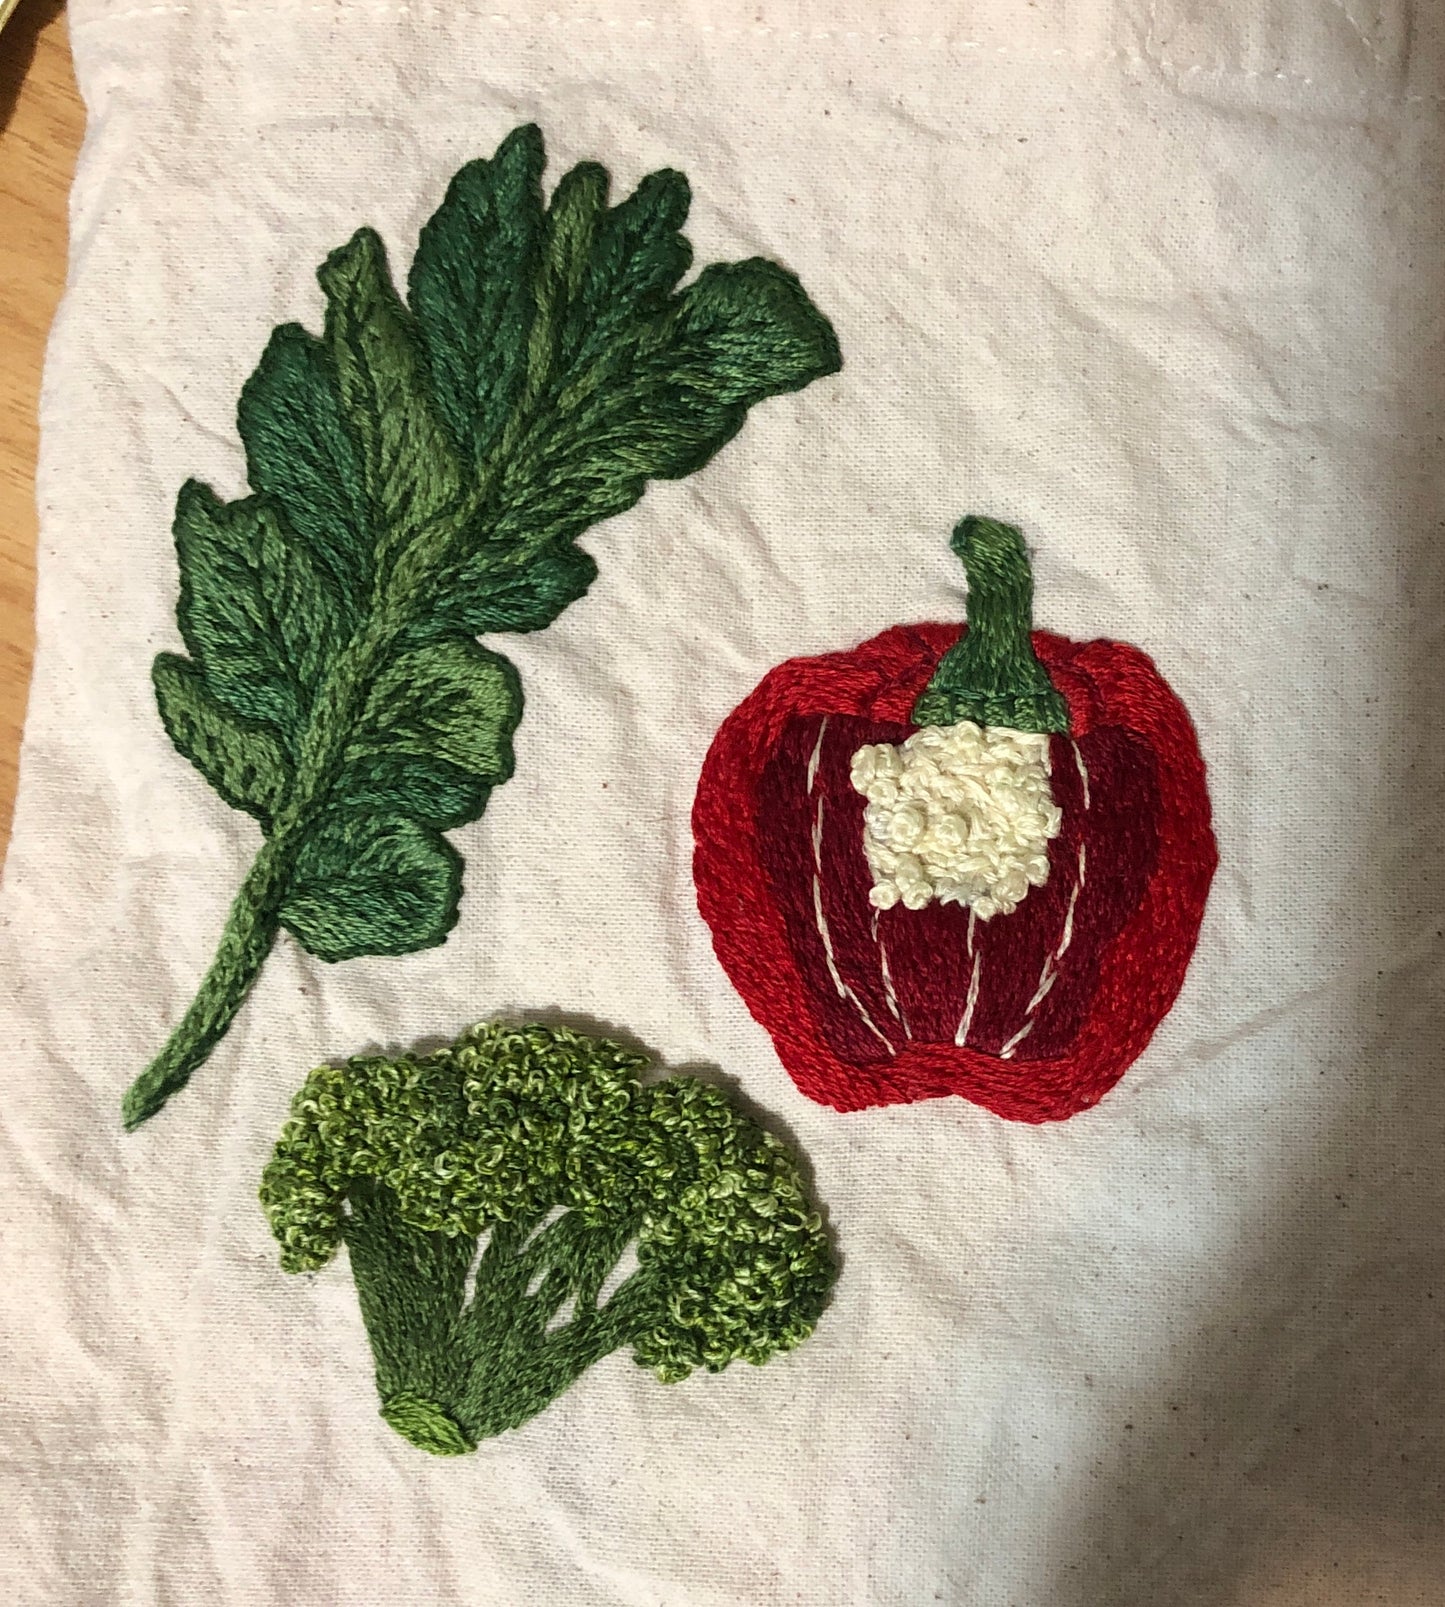 WORKSHOP: 8/15 Upcycle Your Tote Bag with Veggie Embroidery